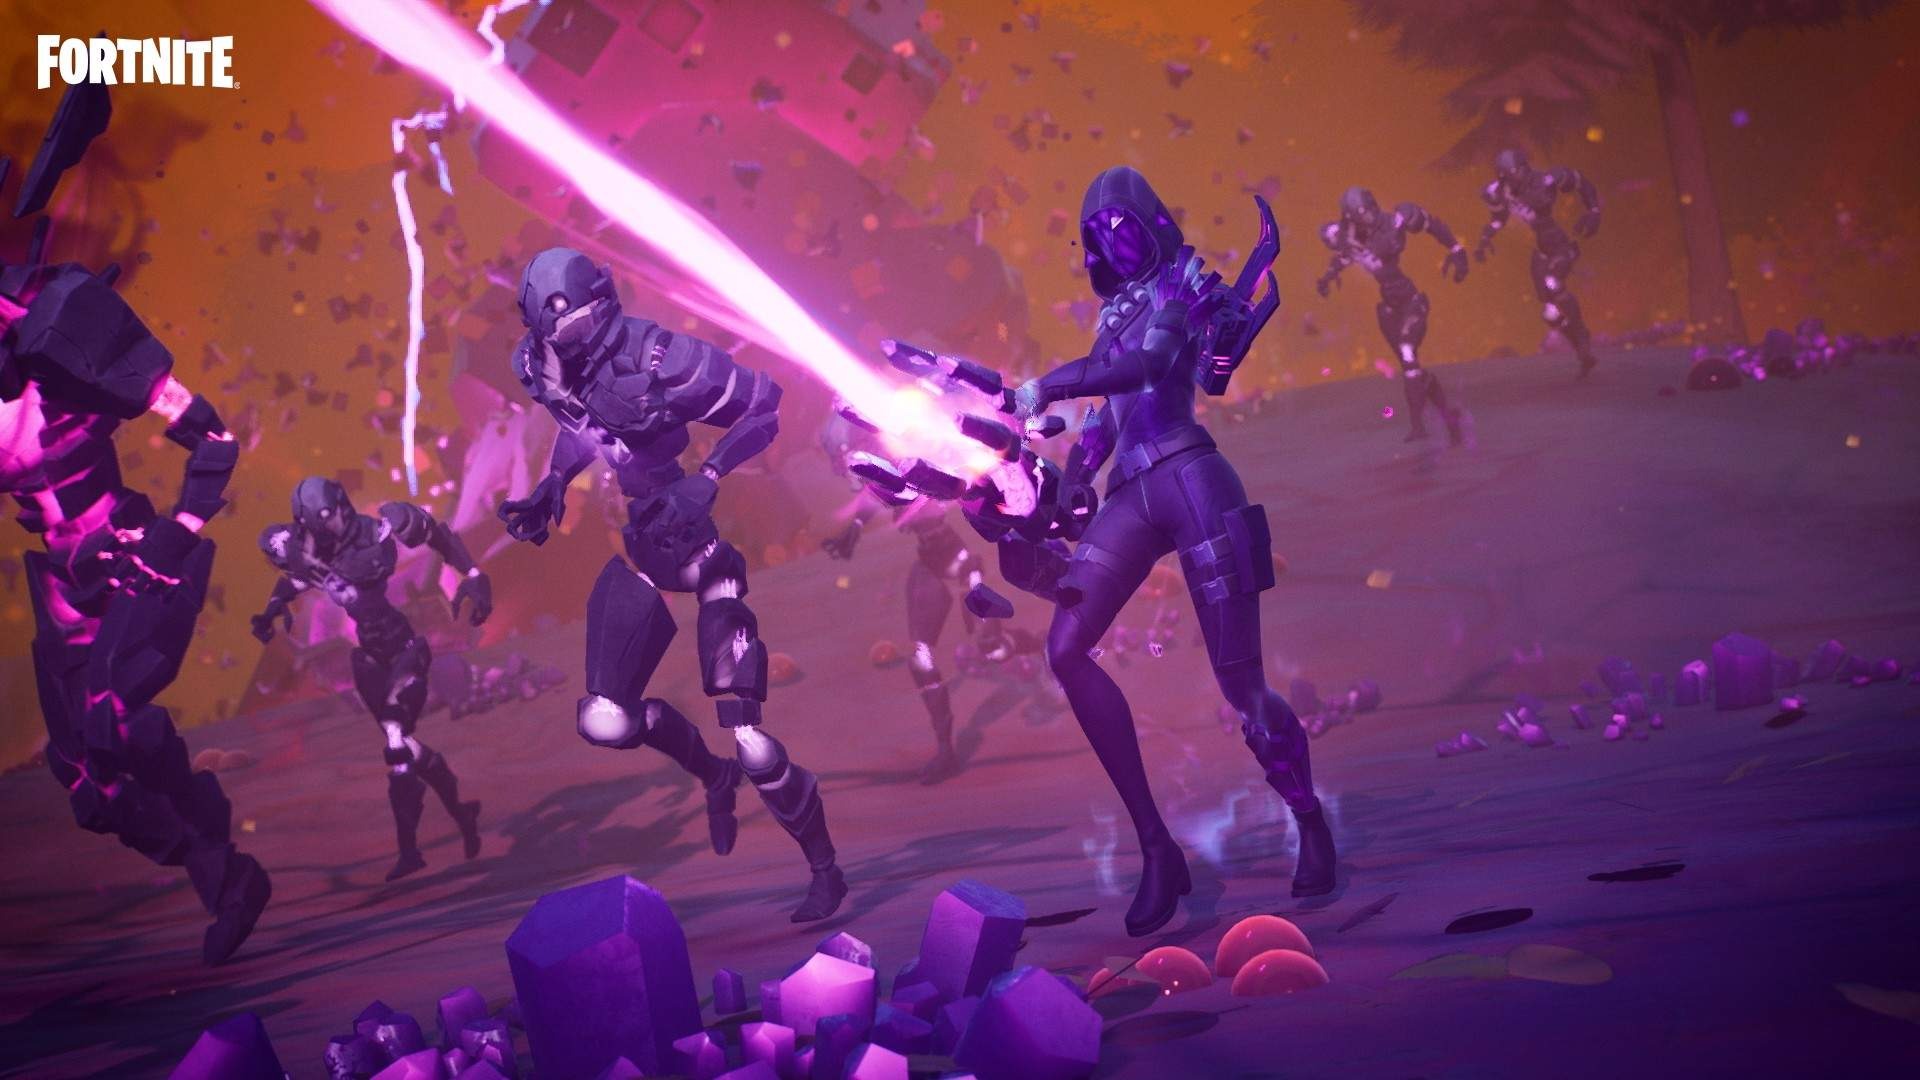 Apple will blacklist 'Fortnite' from App Store for years, says Epic Games  CEO